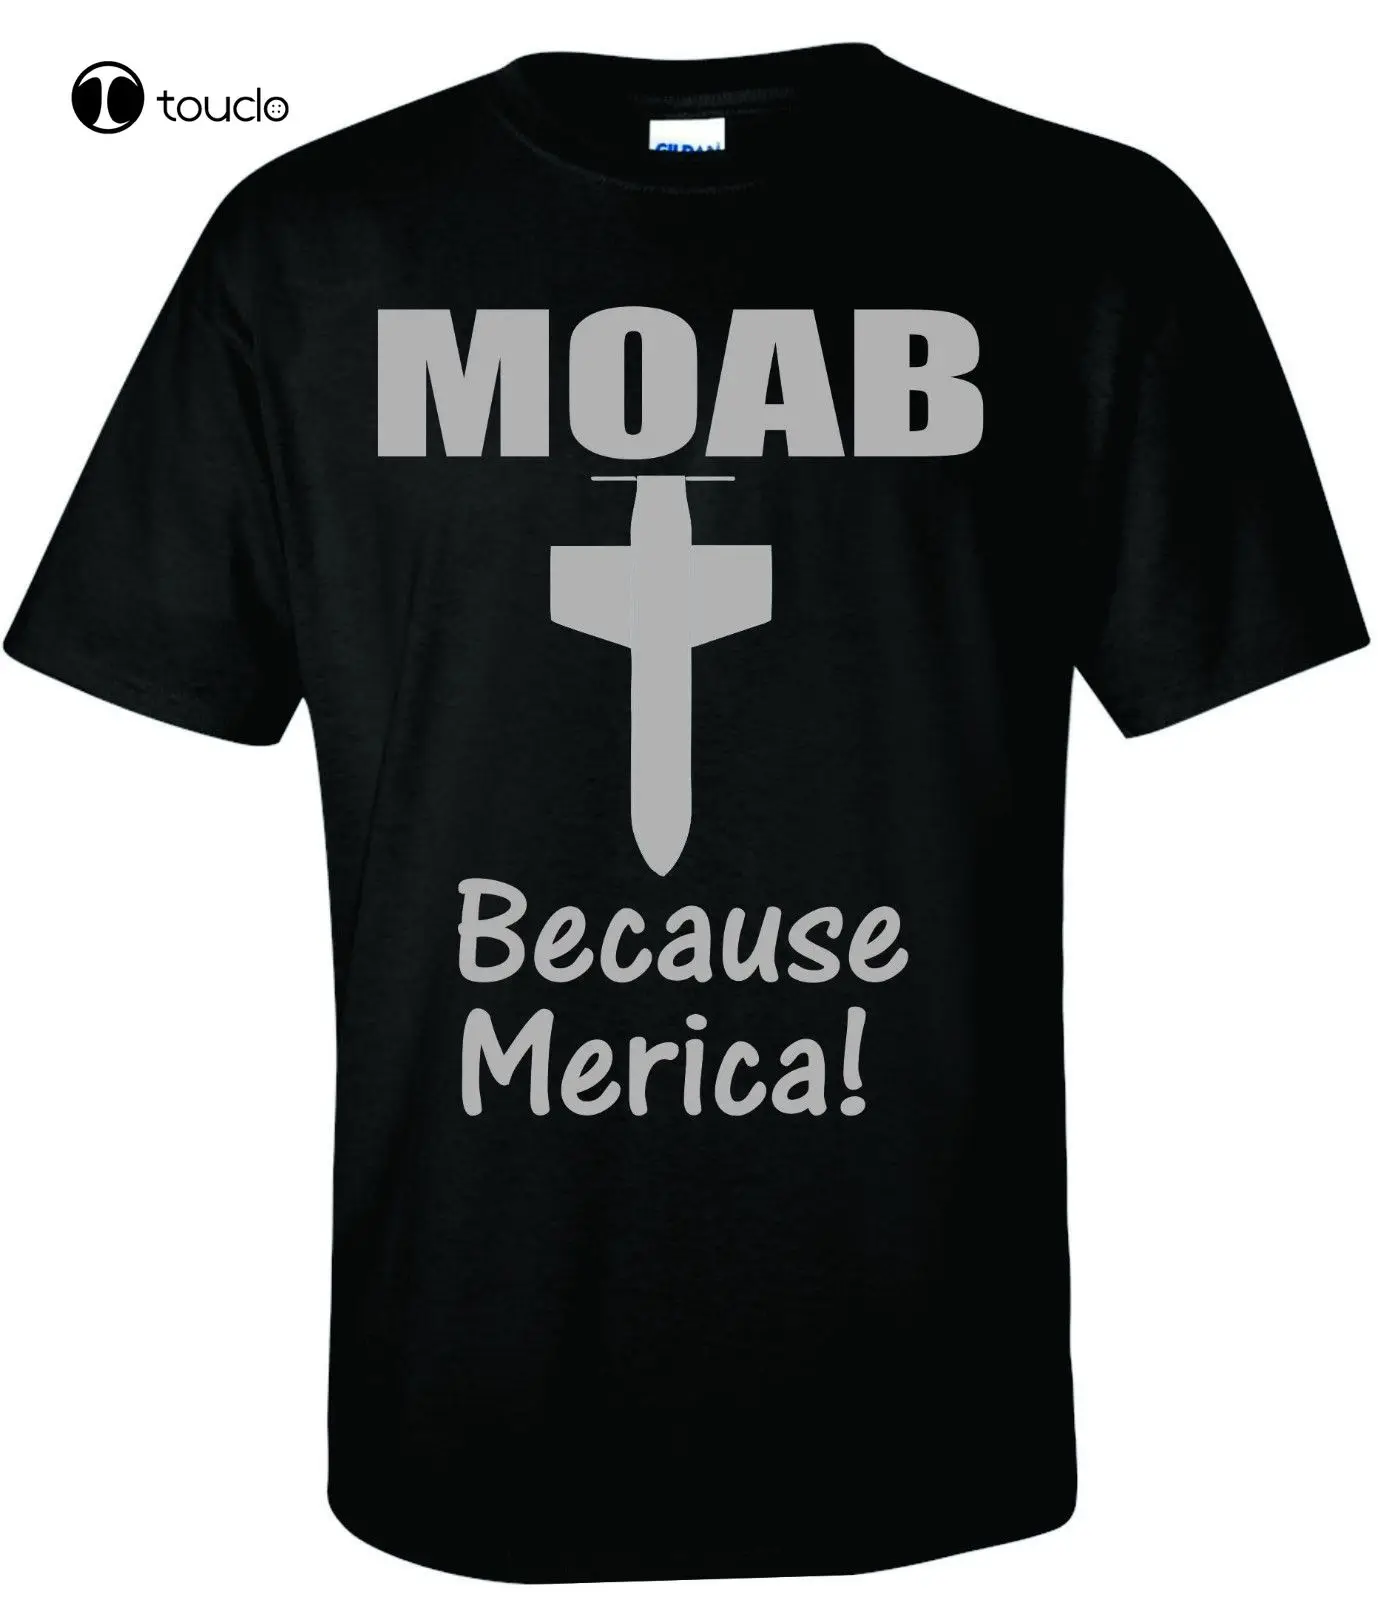 

Hot Sale 100% Cotton Moab Military Mother Of All Bombs Funny America T-Shirt Merica Tee Patriotic Tee Shirt fashion funny new